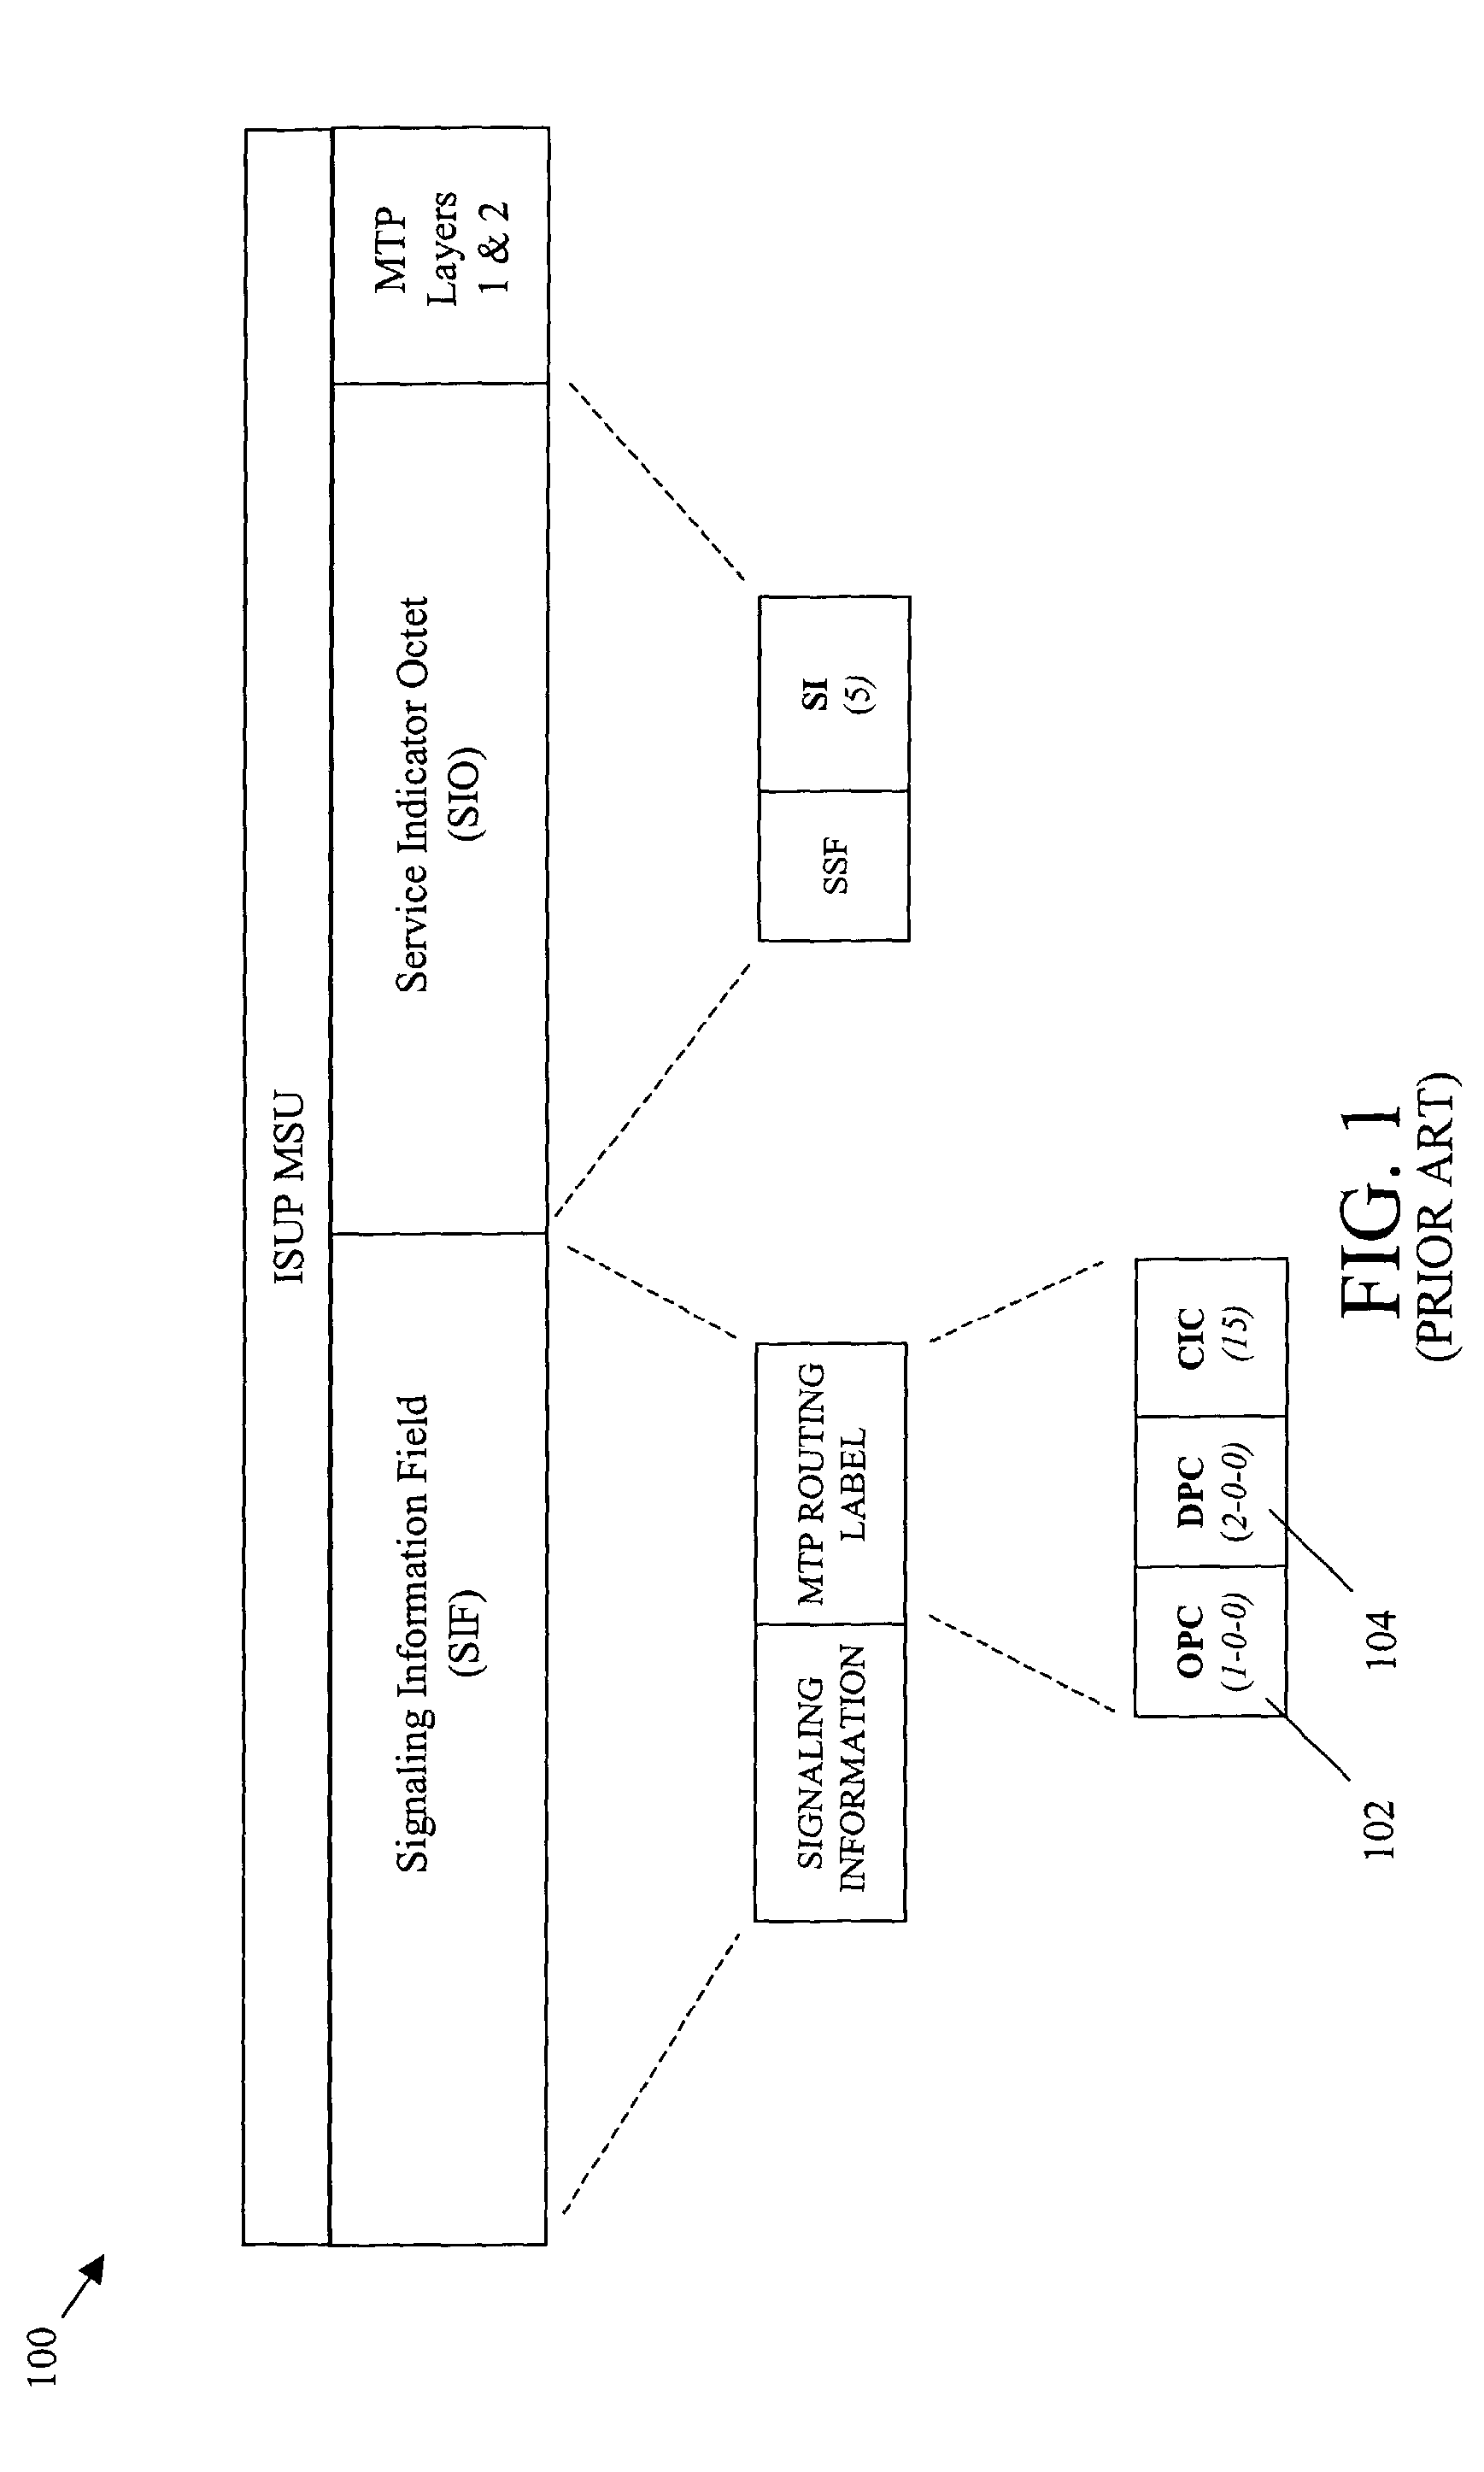 Methods and systems for routing signaling messages to the same destination over different routes using message origination information associated with non-adjacent signaling nodes